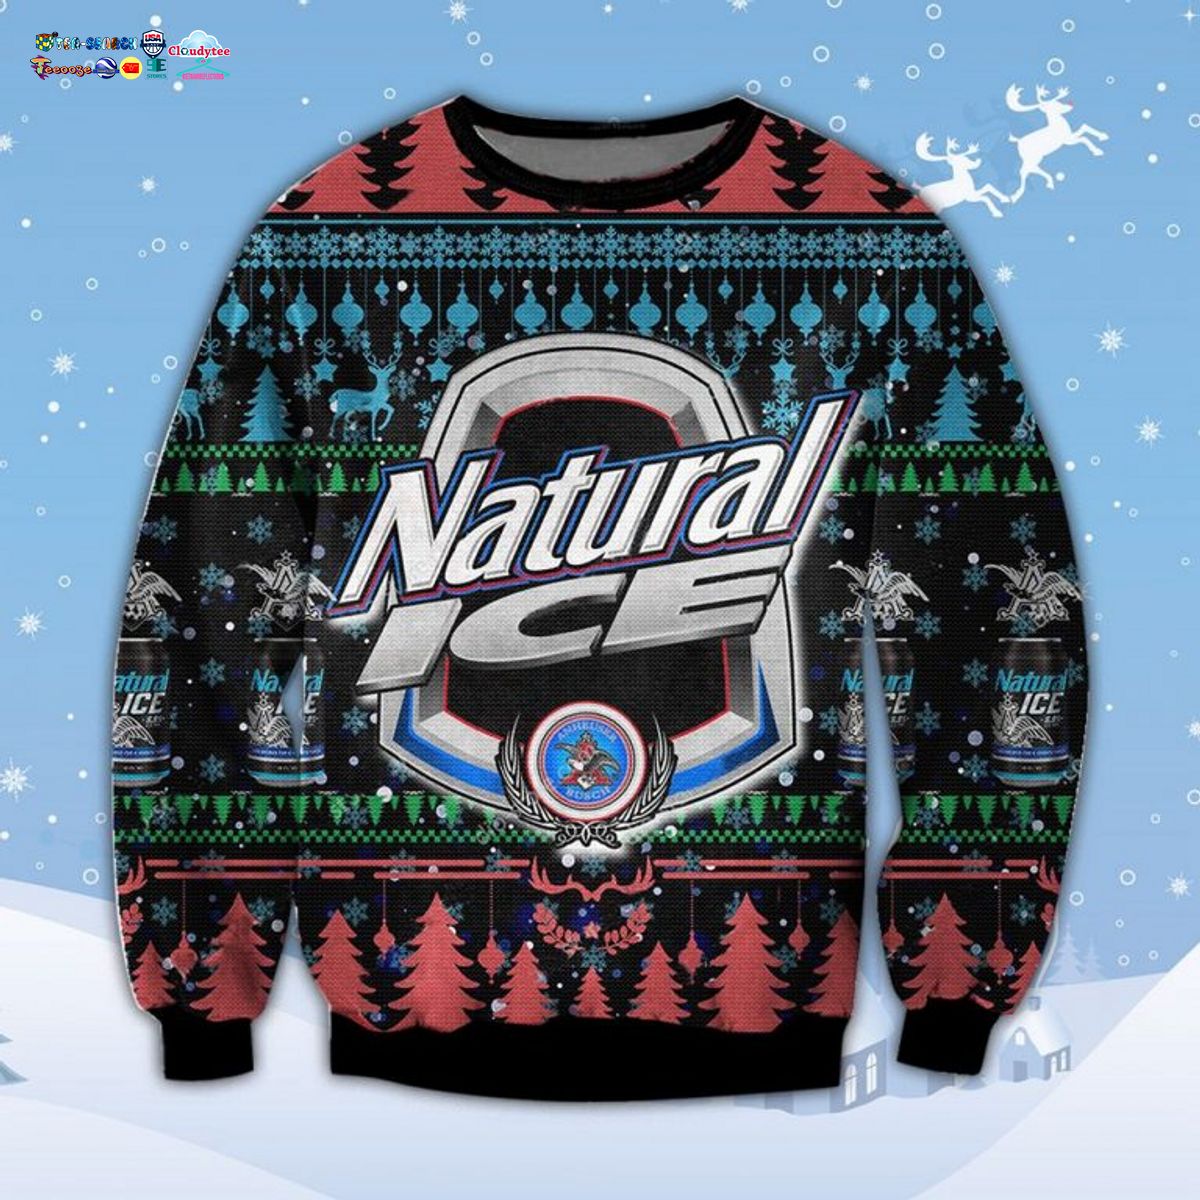 Natural Ice Ugly Christmas Sweater - This is awesome and unique